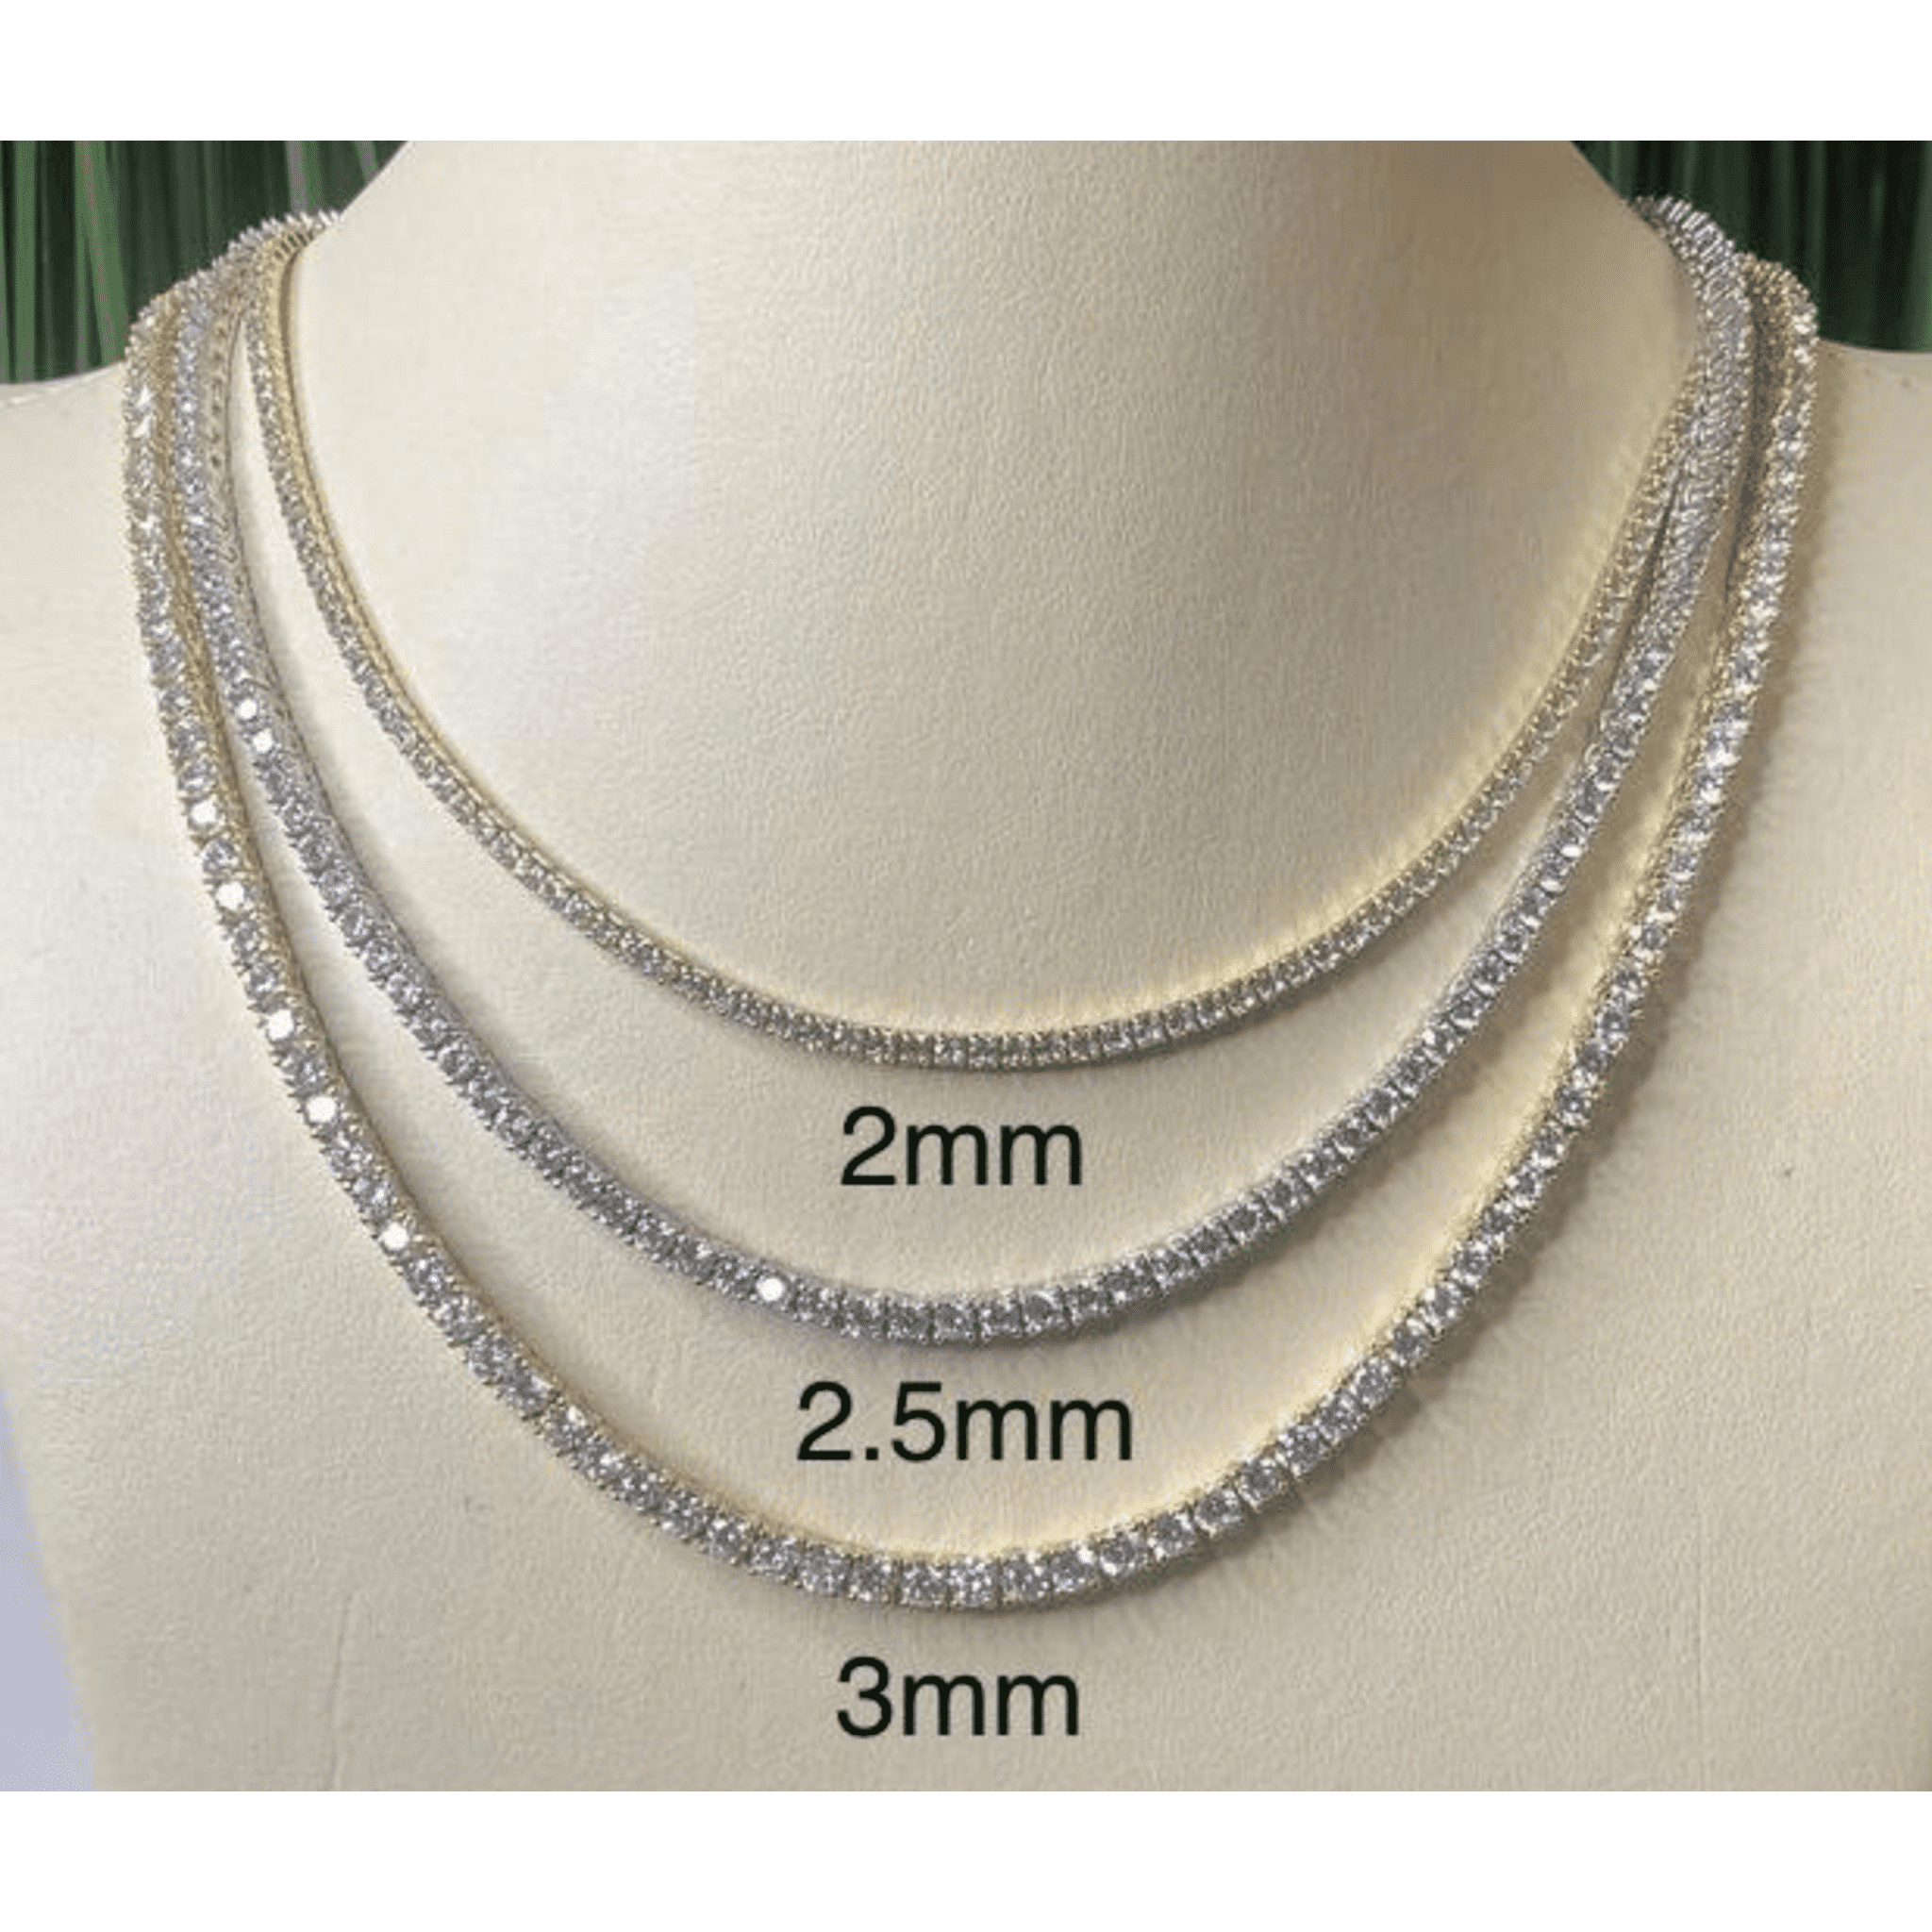 2.5mm Gold Classic Tennis Necklace